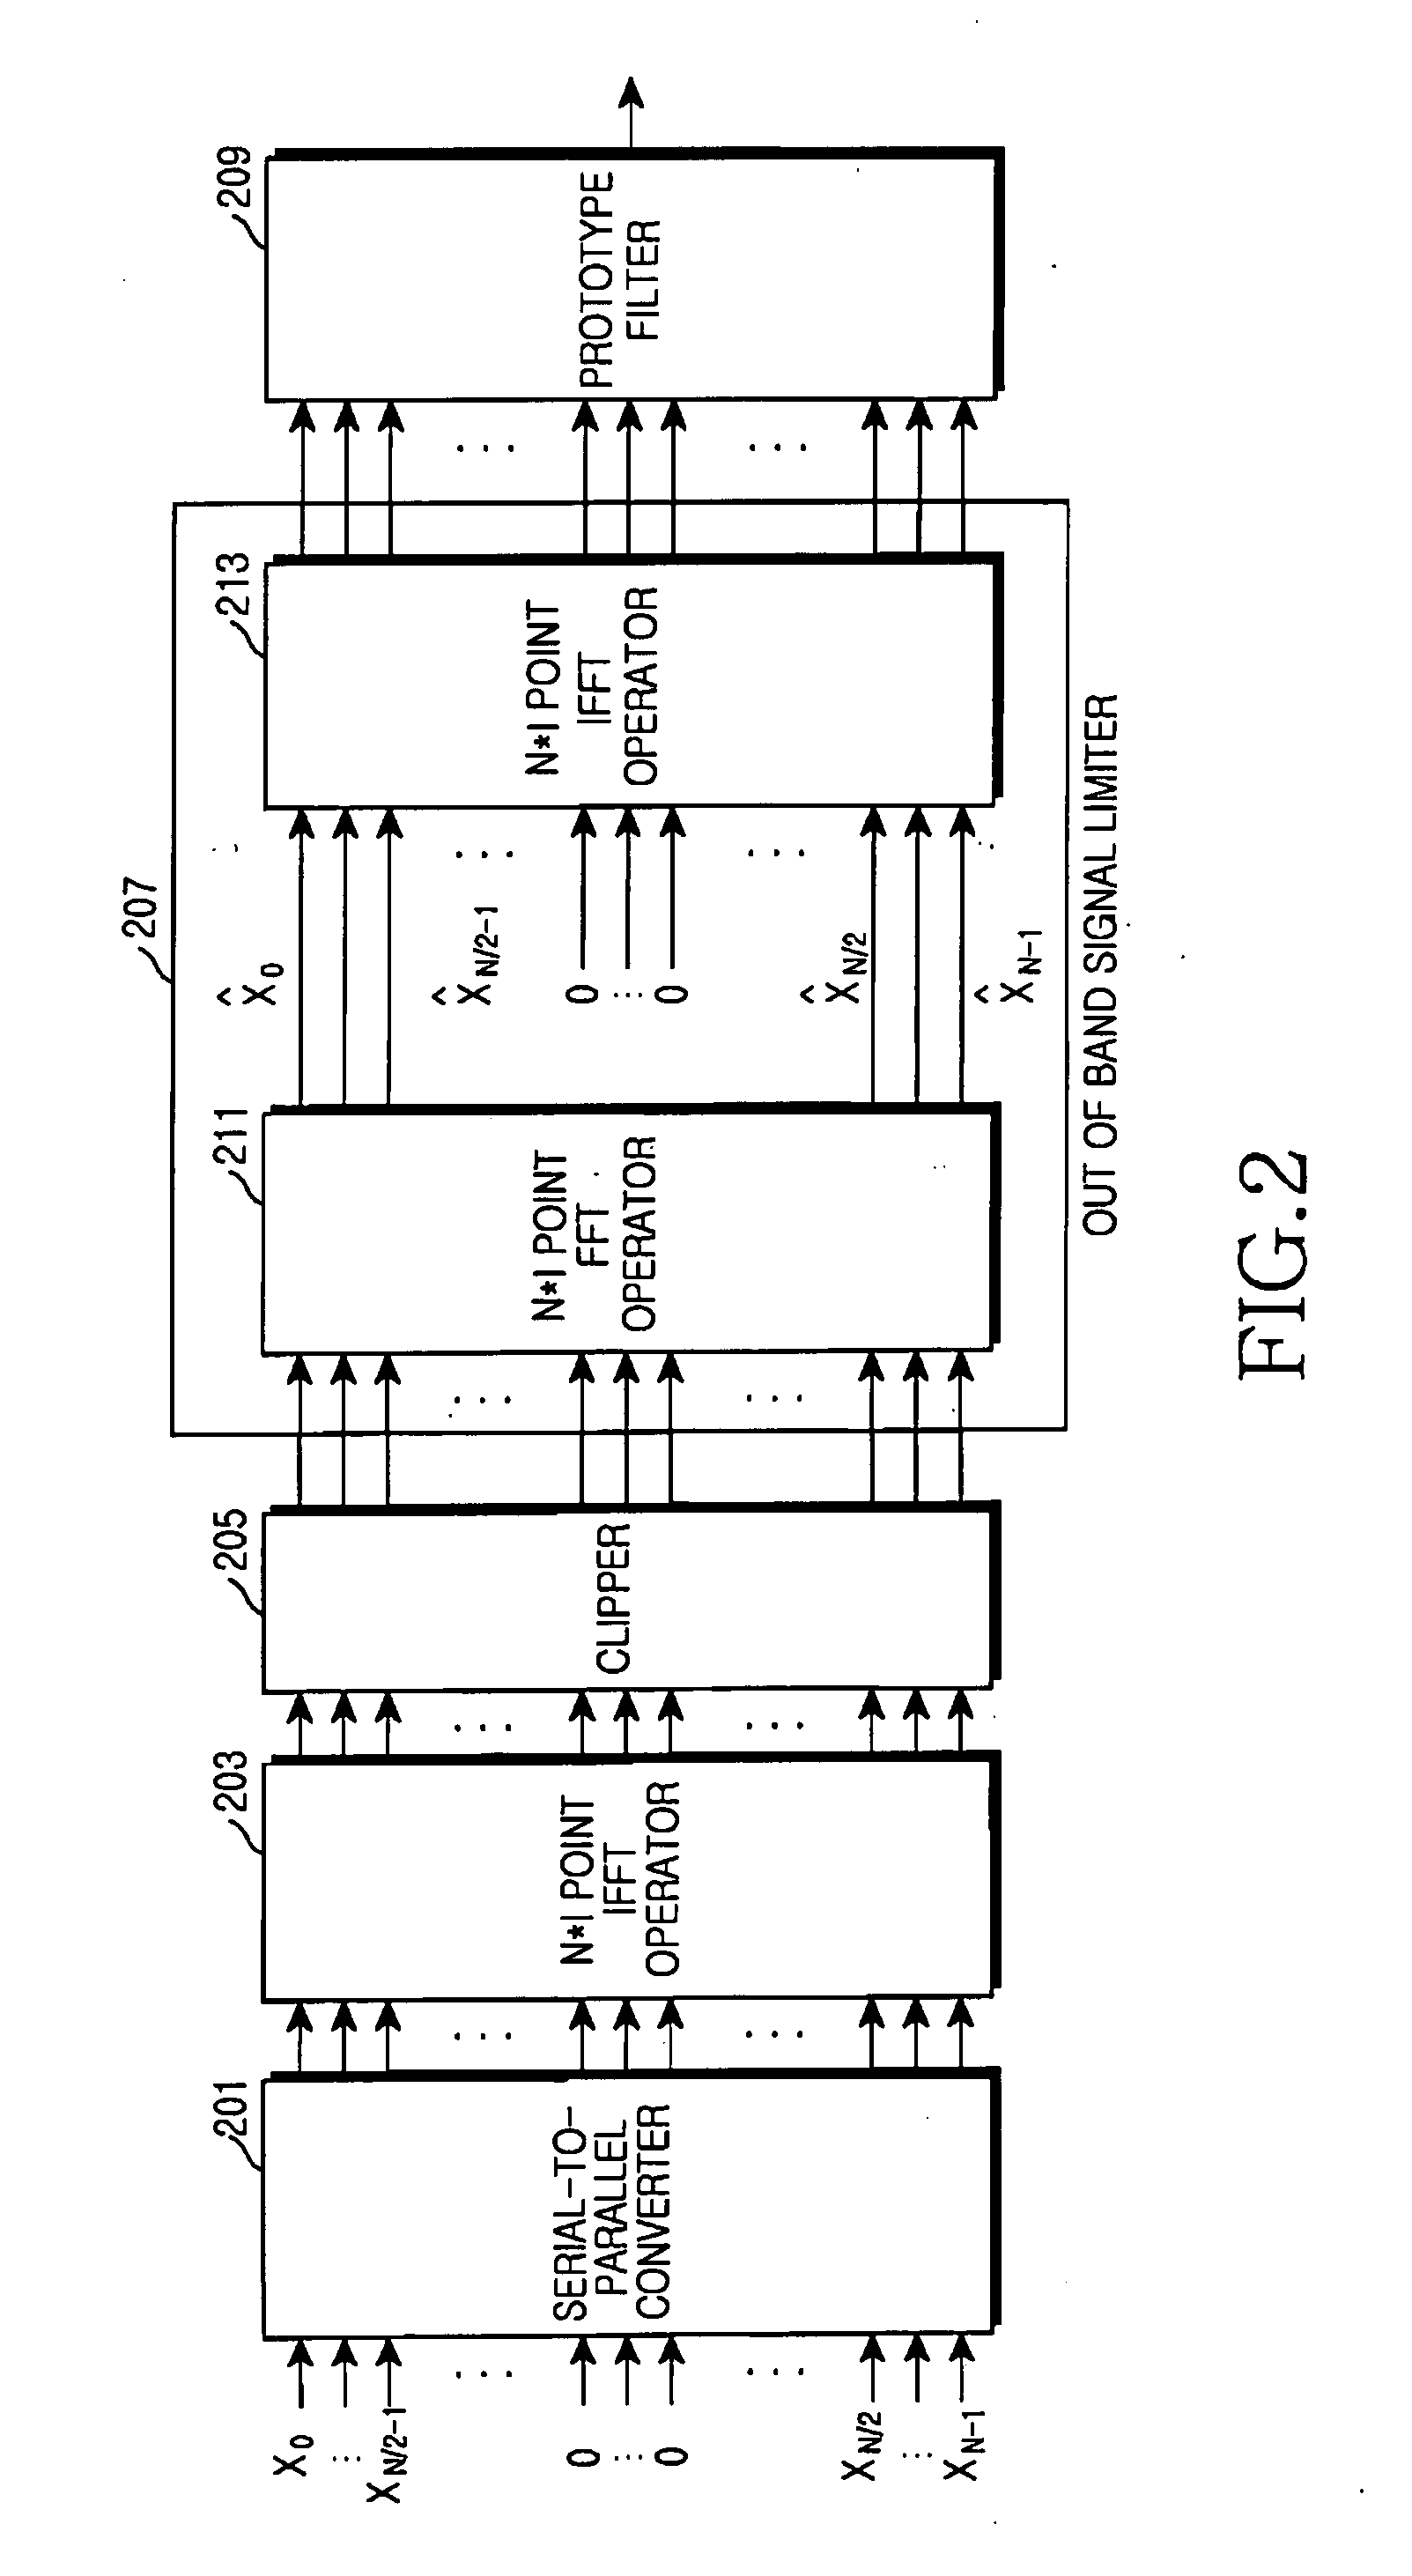 Apparatus for reducing clipping noise in a broadband wireless communication system and method thereof